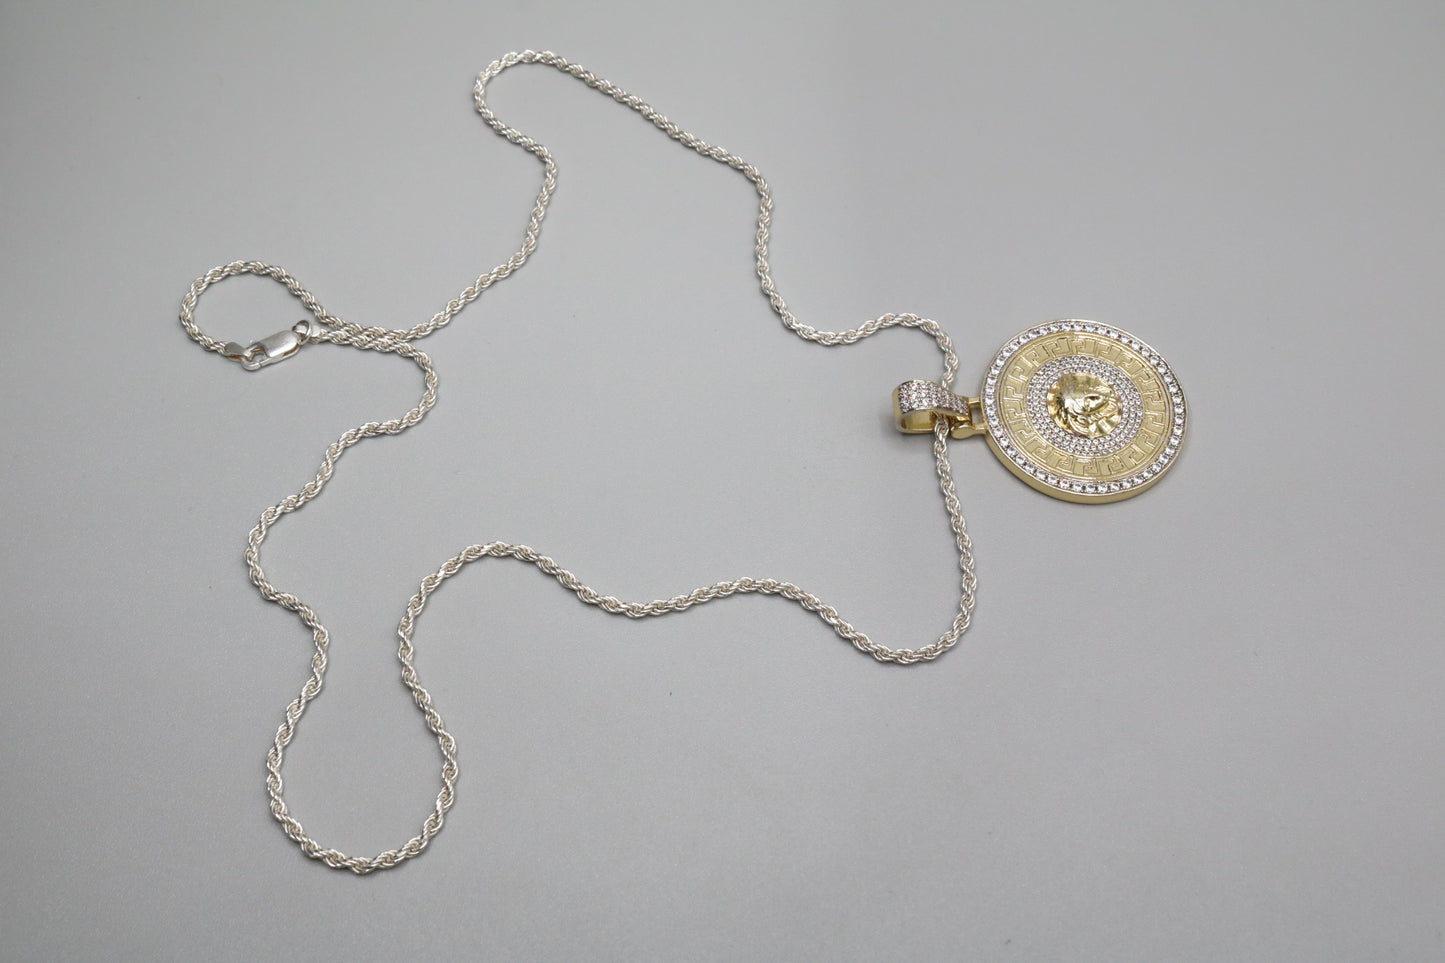 Silver Rope Style Chain W/ Medusa Pendant (Size 29")